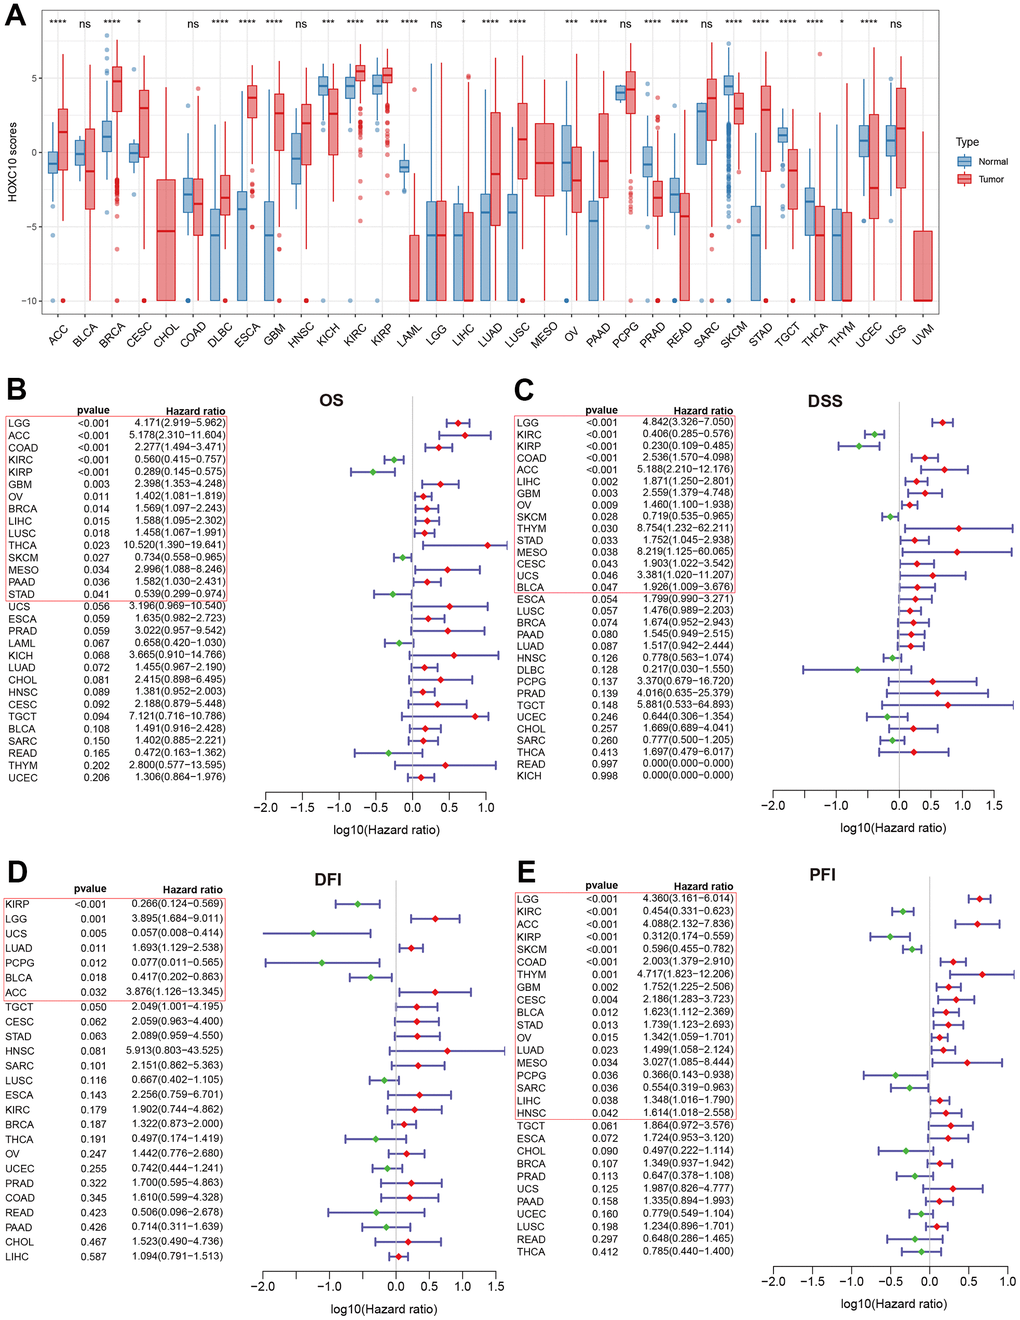 Abnormal expression of HOXC10 and its relevance with clinical prognosis. (A) Expression levels of HOXC10 between tumor and normal tissues. (B–E) Forest plot showed the correlations of HOXC10 with clinical prognosis by univariate Cox regression: OS, DSS, PFI and DFI.